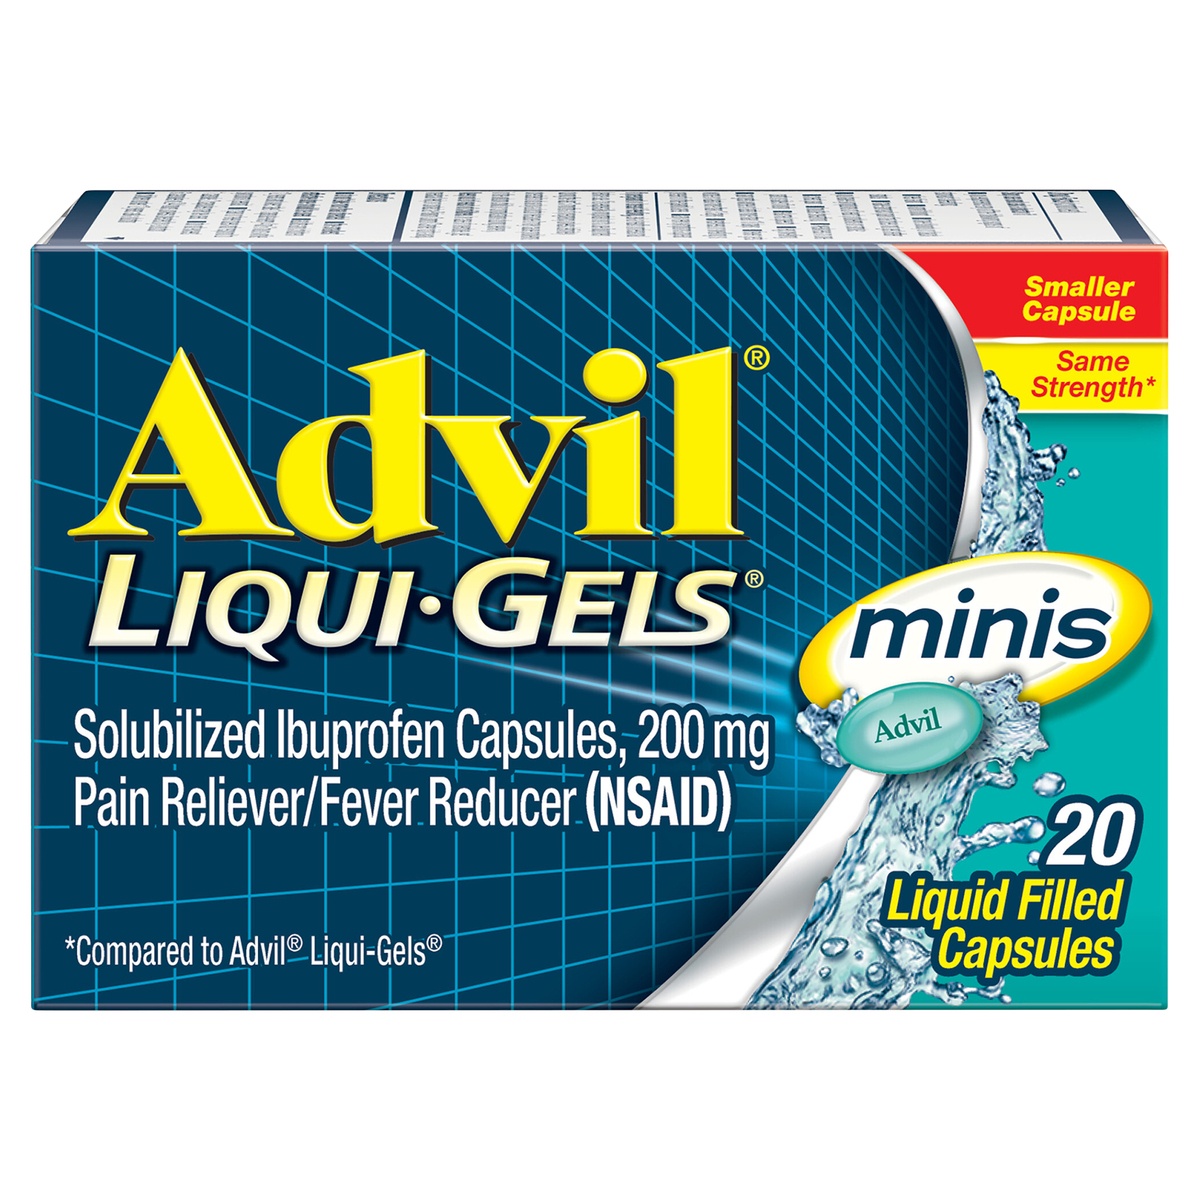 slide 1 of 10, Advil Liqui-Gels minis Pain Reliever and Fever Reducer, Ibuprofen 200mg for Pain Relief - 20 Liquid Filled Capsules, 20 ct